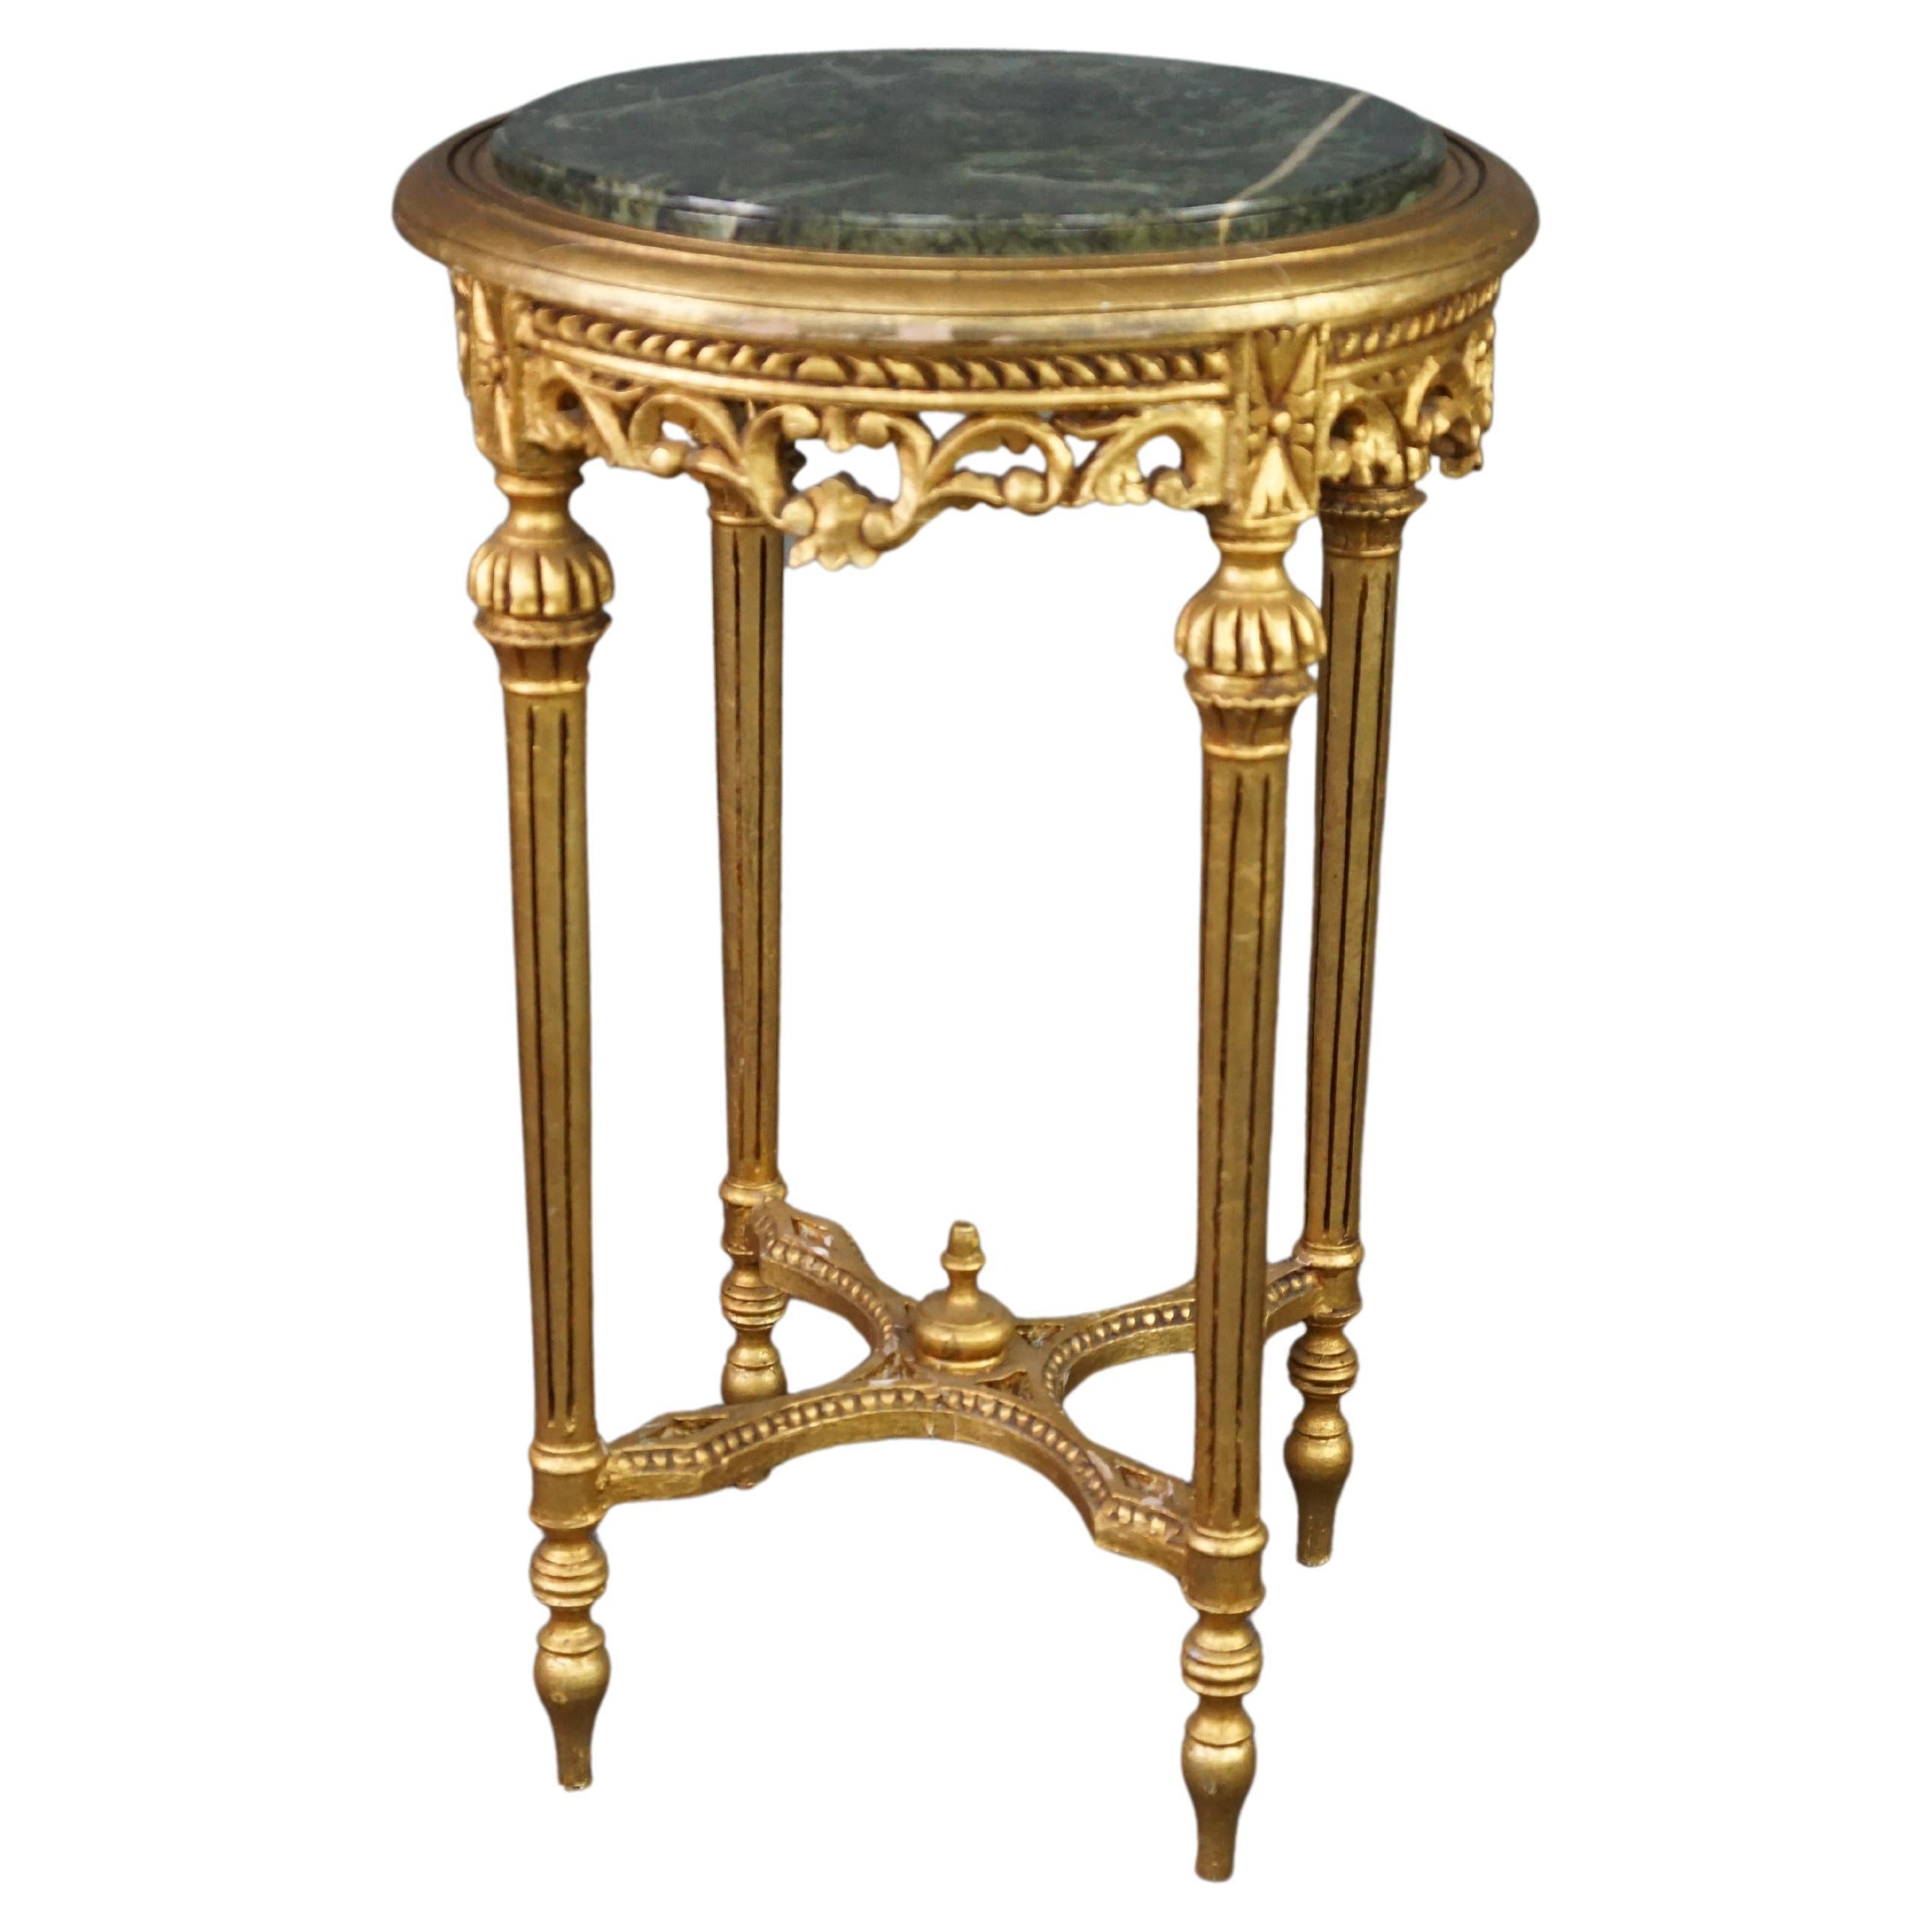 beautiful antique pedestal / plant stand with Italian marble and gold-plated woo